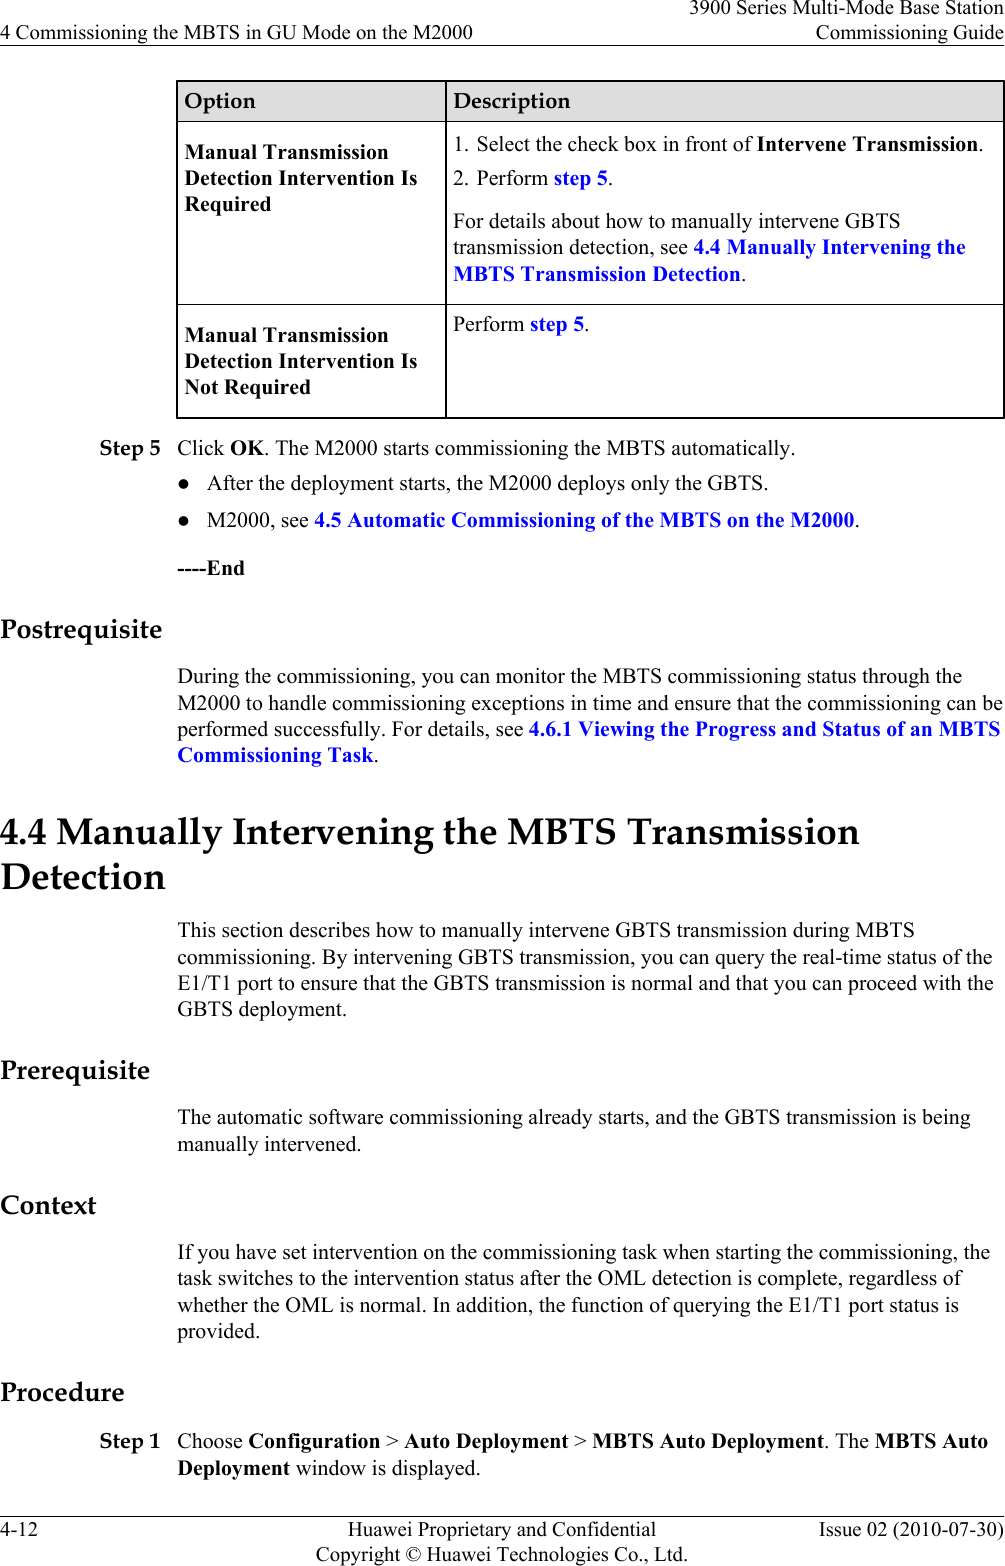 Option DescriptionManual TransmissionDetection Intervention IsRequired1. Select the check box in front of Intervene Transmission.2. Perform step 5.For details about how to manually intervene GBTStransmission detection, see 4.4 Manually Intervening theMBTS Transmission Detection.Manual TransmissionDetection Intervention IsNot RequiredPerform step 5.Step 5 Click OK. The M2000 starts commissioning the MBTS automatically.lAfter the deployment starts, the M2000 deploys only the GBTS.lM2000, see 4.5 Automatic Commissioning of the MBTS on the M2000.----EndPostrequisiteDuring the commissioning, you can monitor the MBTS commissioning status through theM2000 to handle commissioning exceptions in time and ensure that the commissioning can beperformed successfully. For details, see 4.6.1 Viewing the Progress and Status of an MBTSCommissioning Task.4.4 Manually Intervening the MBTS TransmissionDetectionThis section describes how to manually intervene GBTS transmission during MBTScommissioning. By intervening GBTS transmission, you can query the real-time status of theE1/T1 port to ensure that the GBTS transmission is normal and that you can proceed with theGBTS deployment.PrerequisiteThe automatic software commissioning already starts, and the GBTS transmission is beingmanually intervened.ContextIf you have set intervention on the commissioning task when starting the commissioning, thetask switches to the intervention status after the OML detection is complete, regardless ofwhether the OML is normal. In addition, the function of querying the E1/T1 port status isprovided.ProcedureStep 1 Choose Configuration &gt; Auto Deployment &gt; MBTS Auto Deployment. The MBTS AutoDeployment window is displayed.4 Commissioning the MBTS in GU Mode on the M20003900 Series Multi-Mode Base StationCommissioning Guide4-12 Huawei Proprietary and ConfidentialCopyright © Huawei Technologies Co., Ltd.Issue 02 (2010-07-30)